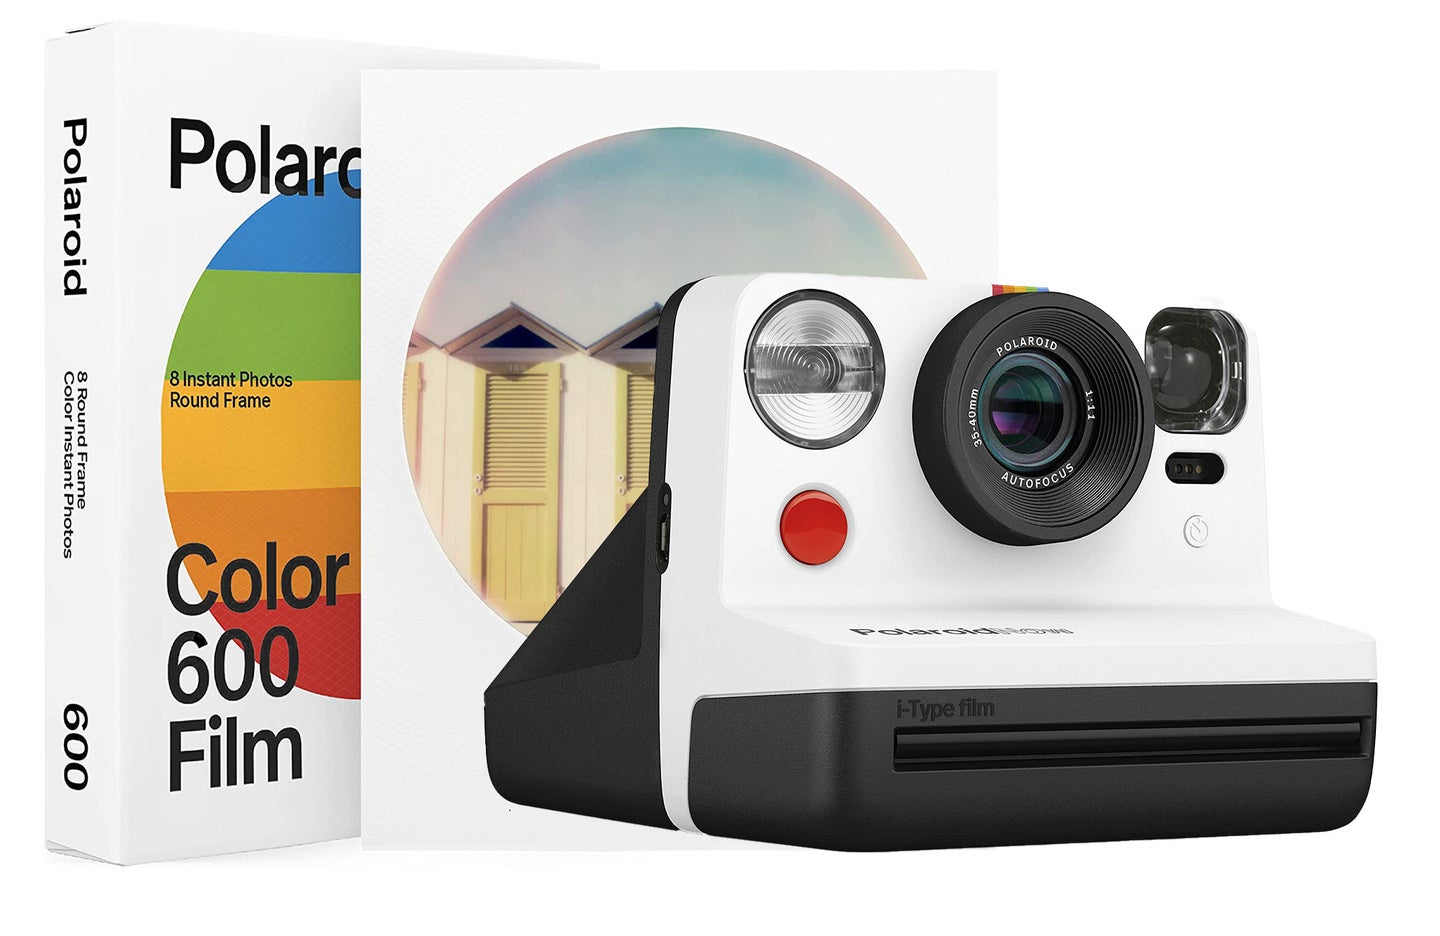 Save 30 percent on Polaroid instant cameras before Black Friday